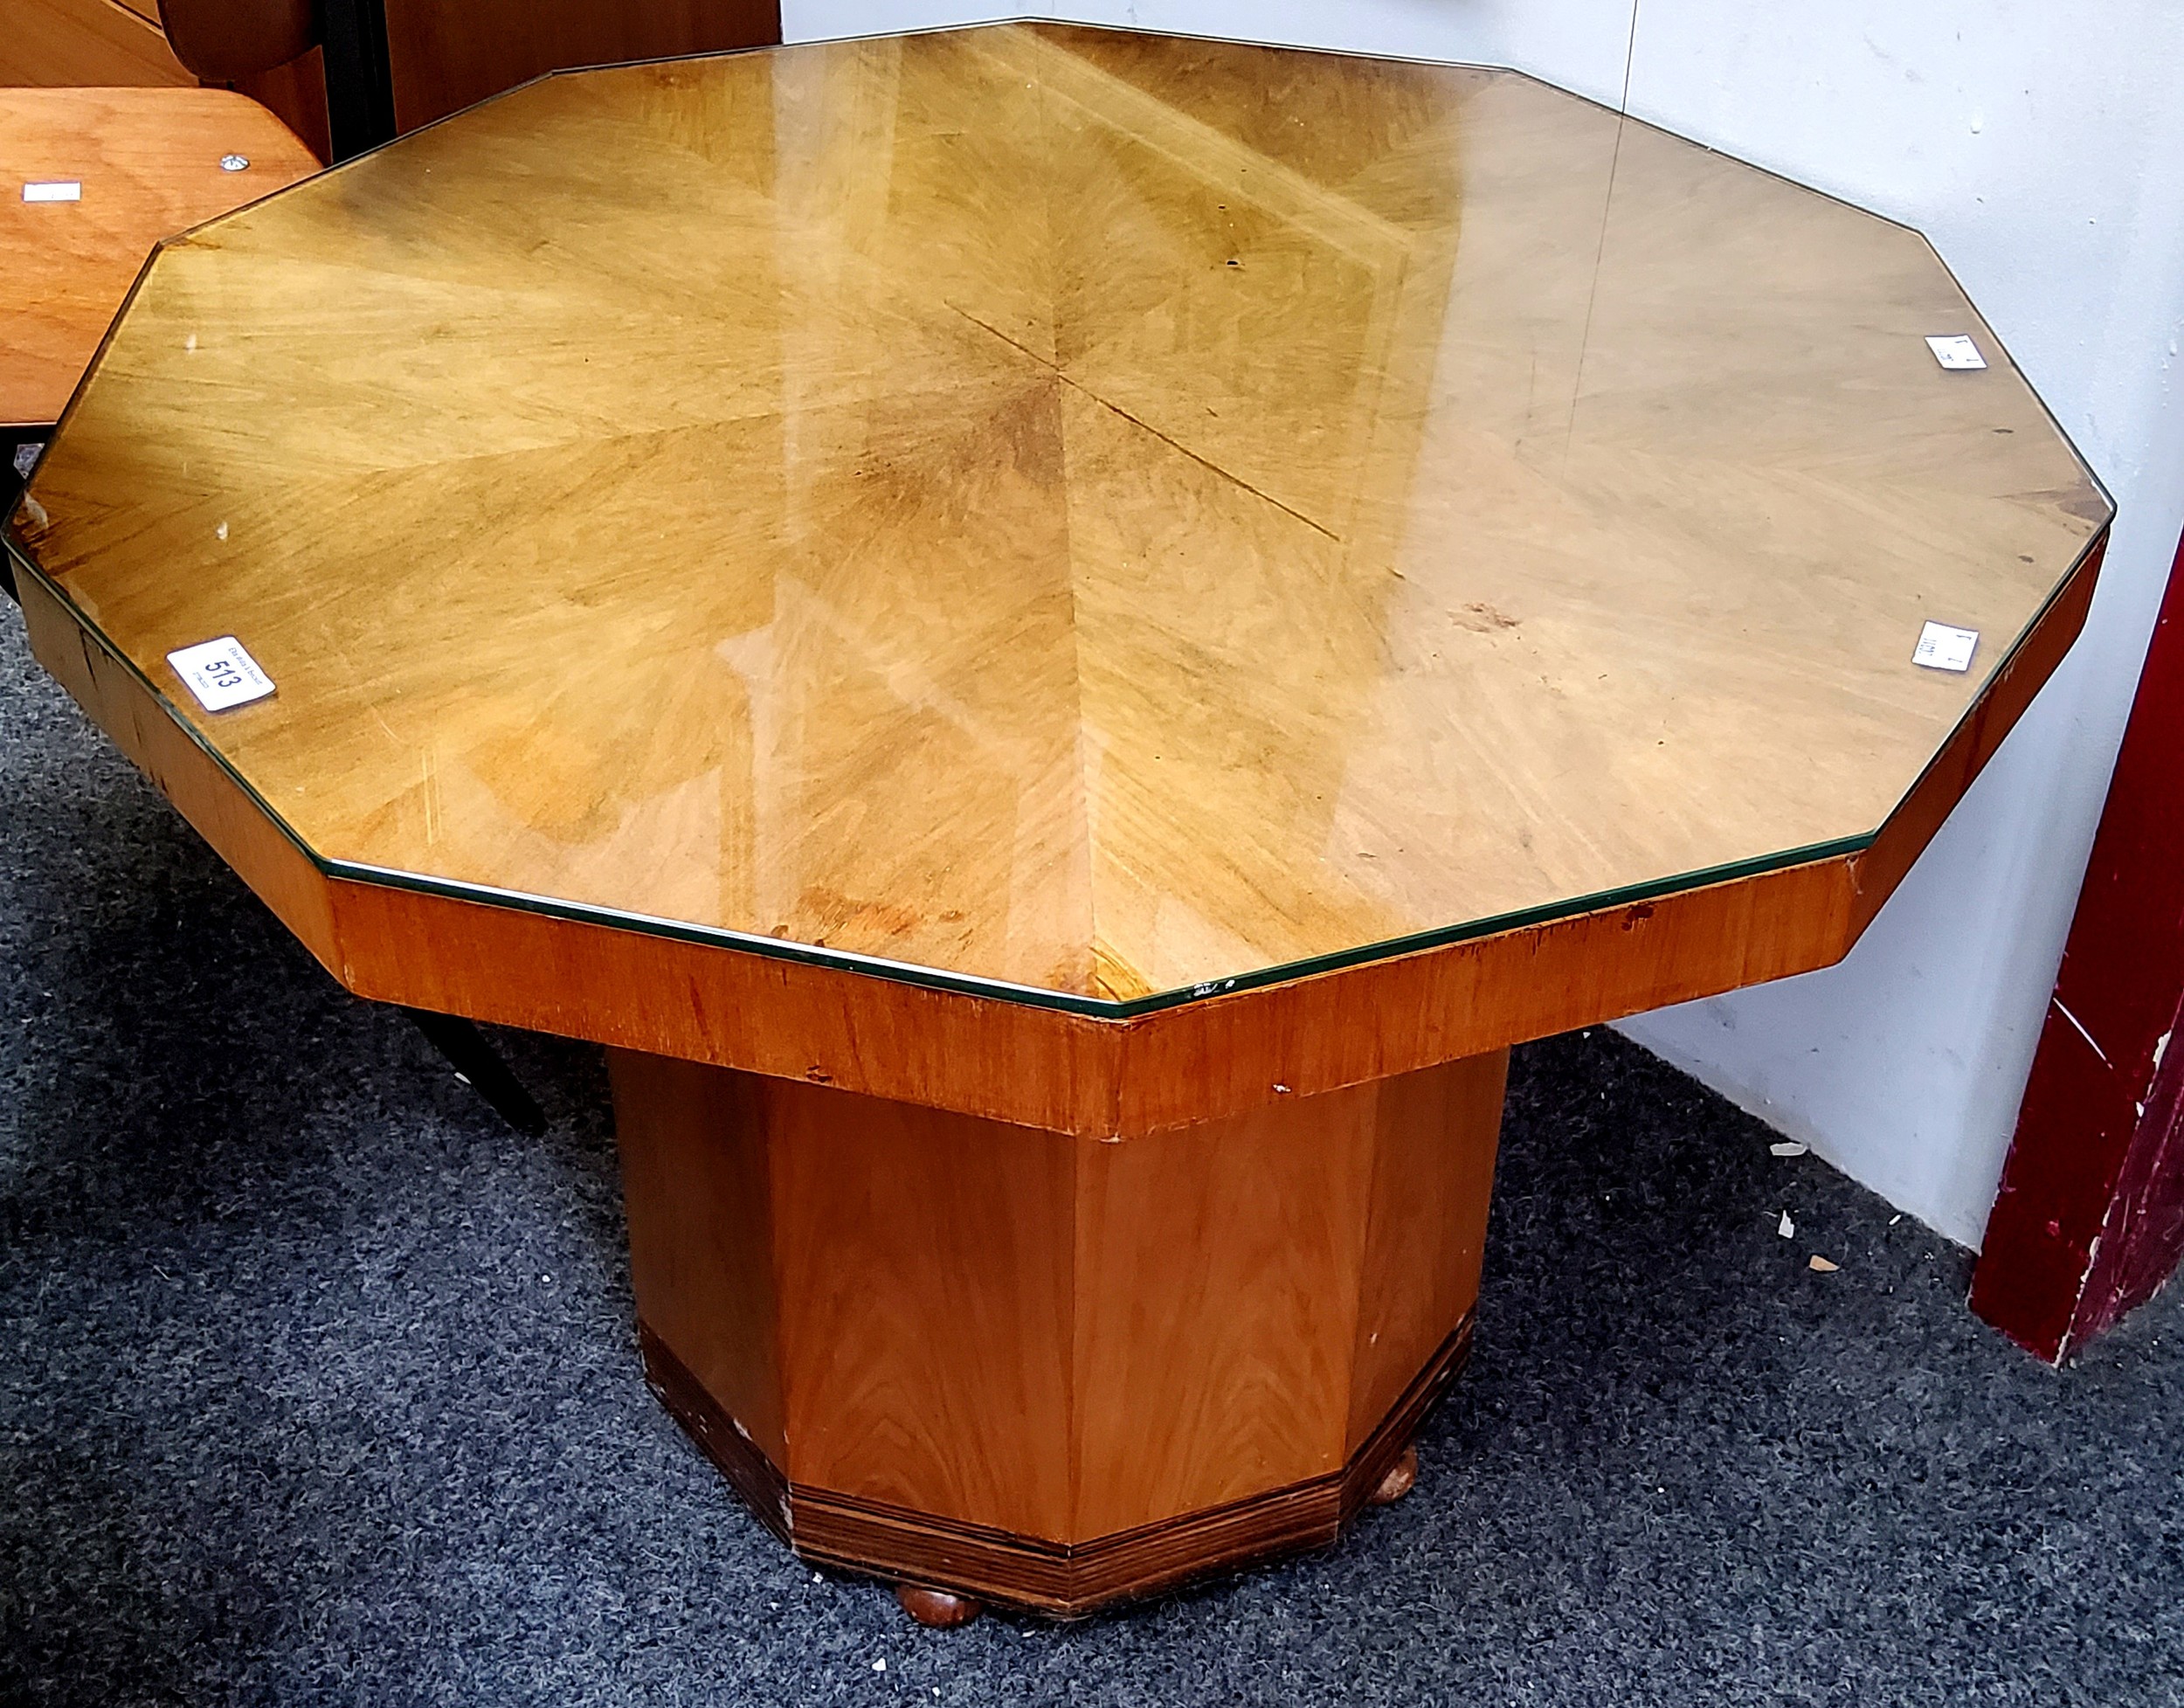 An Art Deco maple veneered decagon shaped occasional table, glass surface, 76cm wide, 52cm high, c.